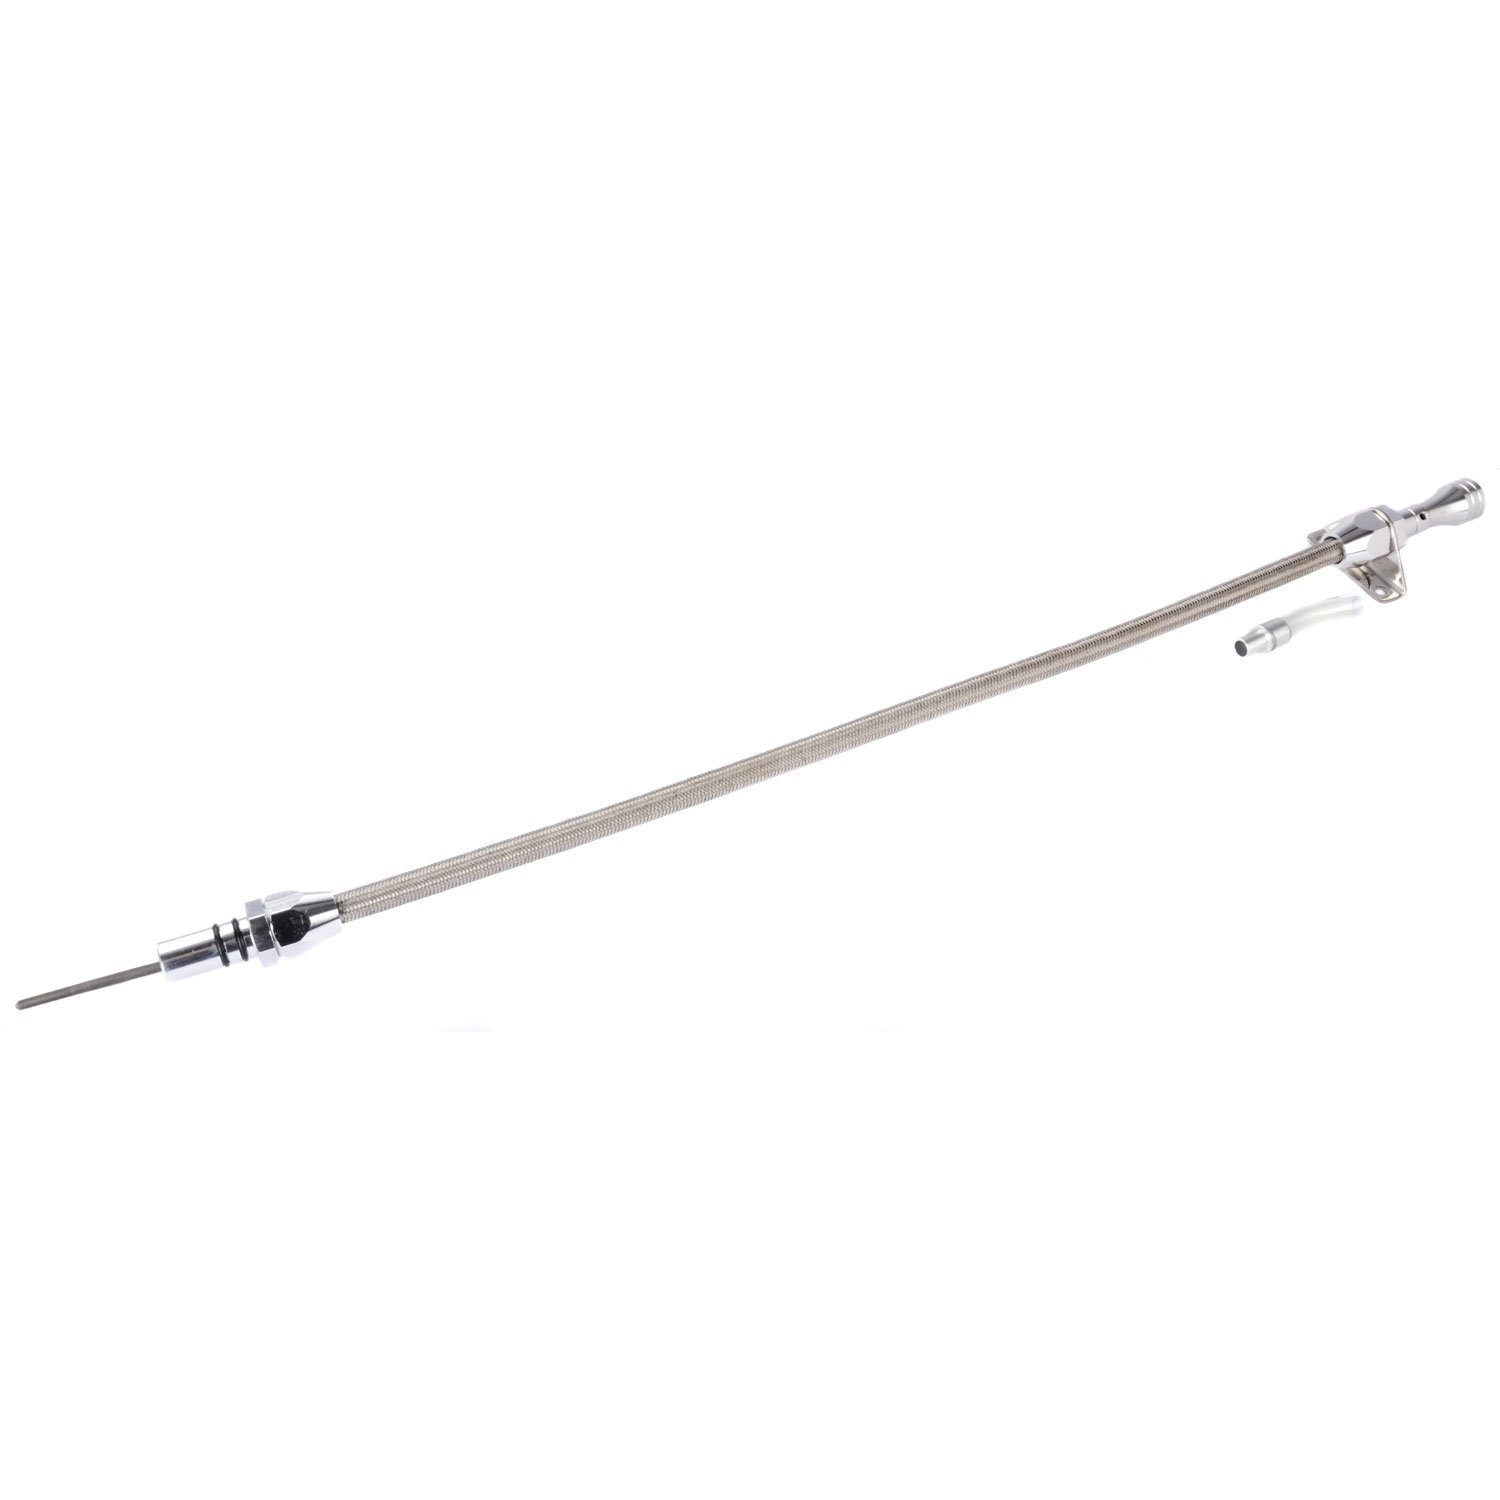 Flexible Braided Transmission Dipstick for GM Powerglide [Polished]